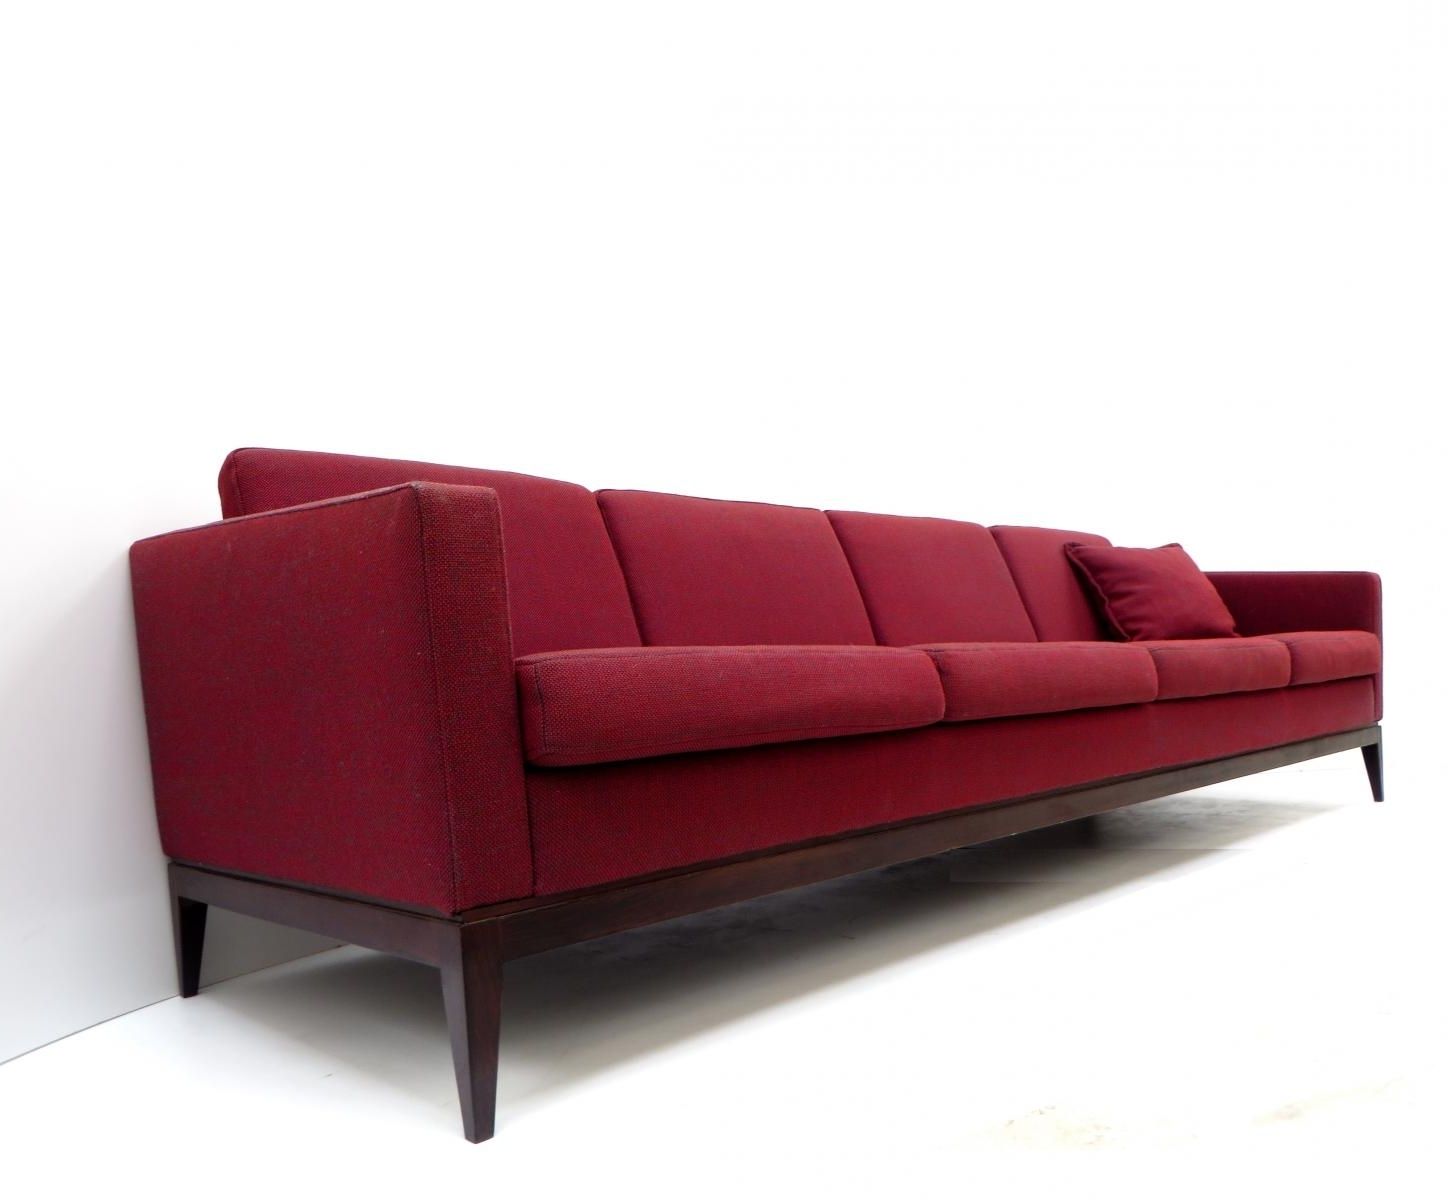 Large Vintage Burgundy Four Seater Sofa For Sale At Pamono Within Well Known Four Seater Sofas (View 4 of 15)